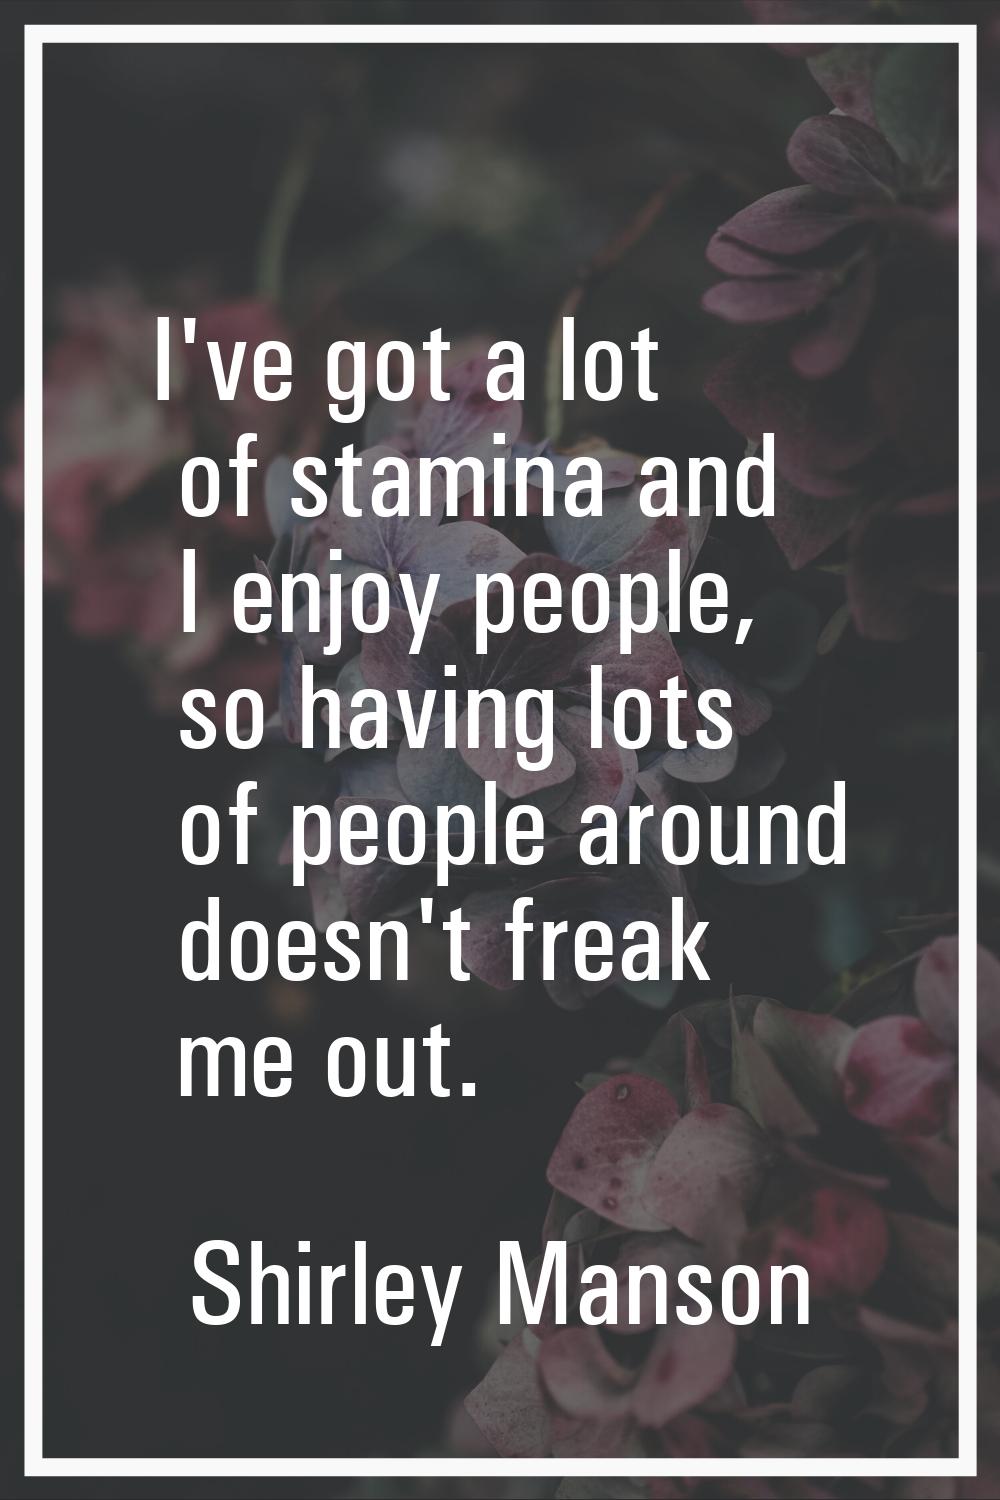 I've got a lot of stamina and I enjoy people, so having lots of people around doesn't freak me out.